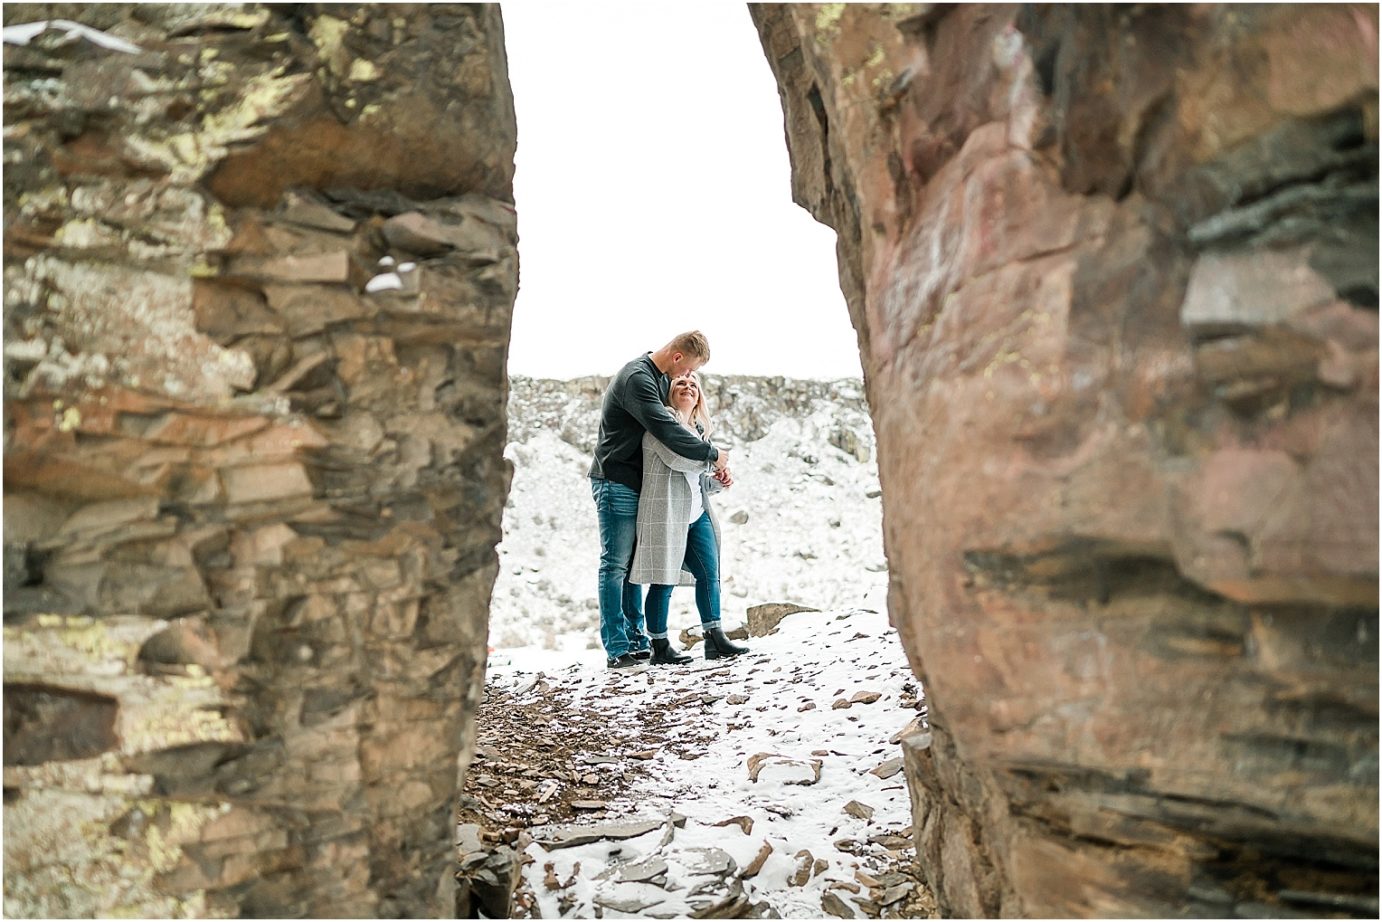 Wintery Desert Engagement Session Vantage Photographer Dakota and Madisyn posed in the crack in the rocks